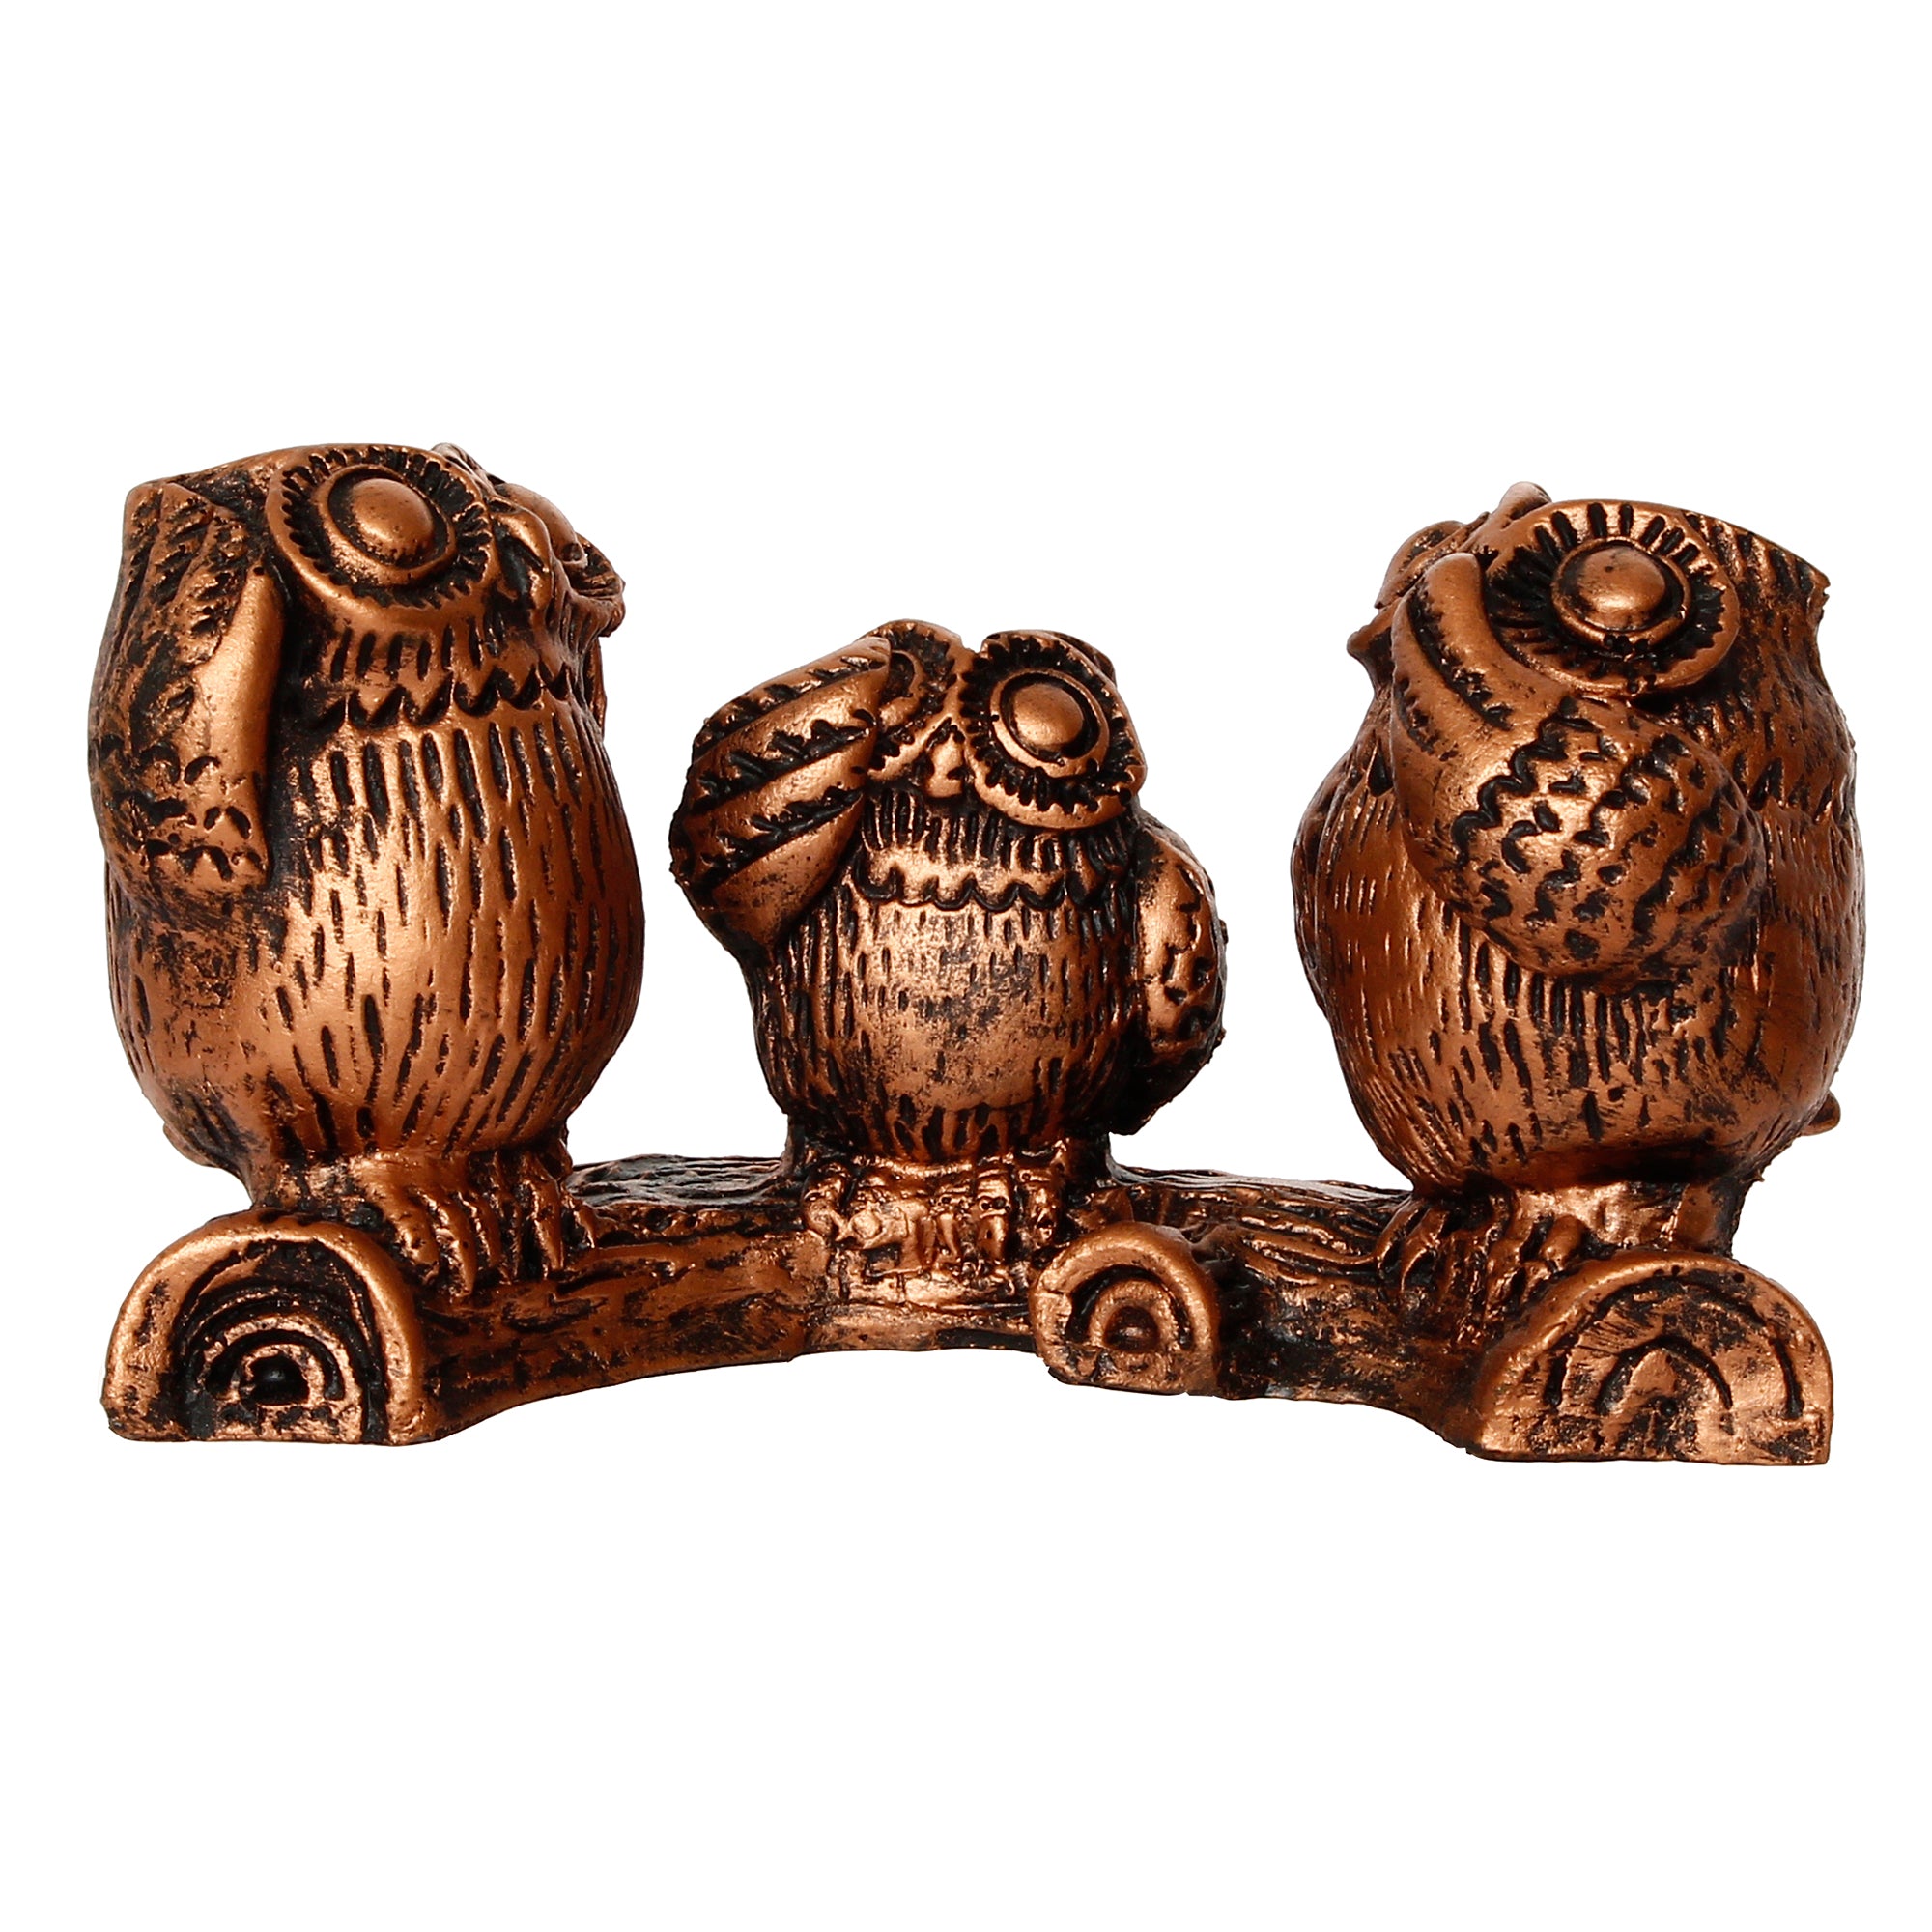 3 Owl Sitting on Branch Brown Handcrafted Polyresin Decorative Showpiece 2